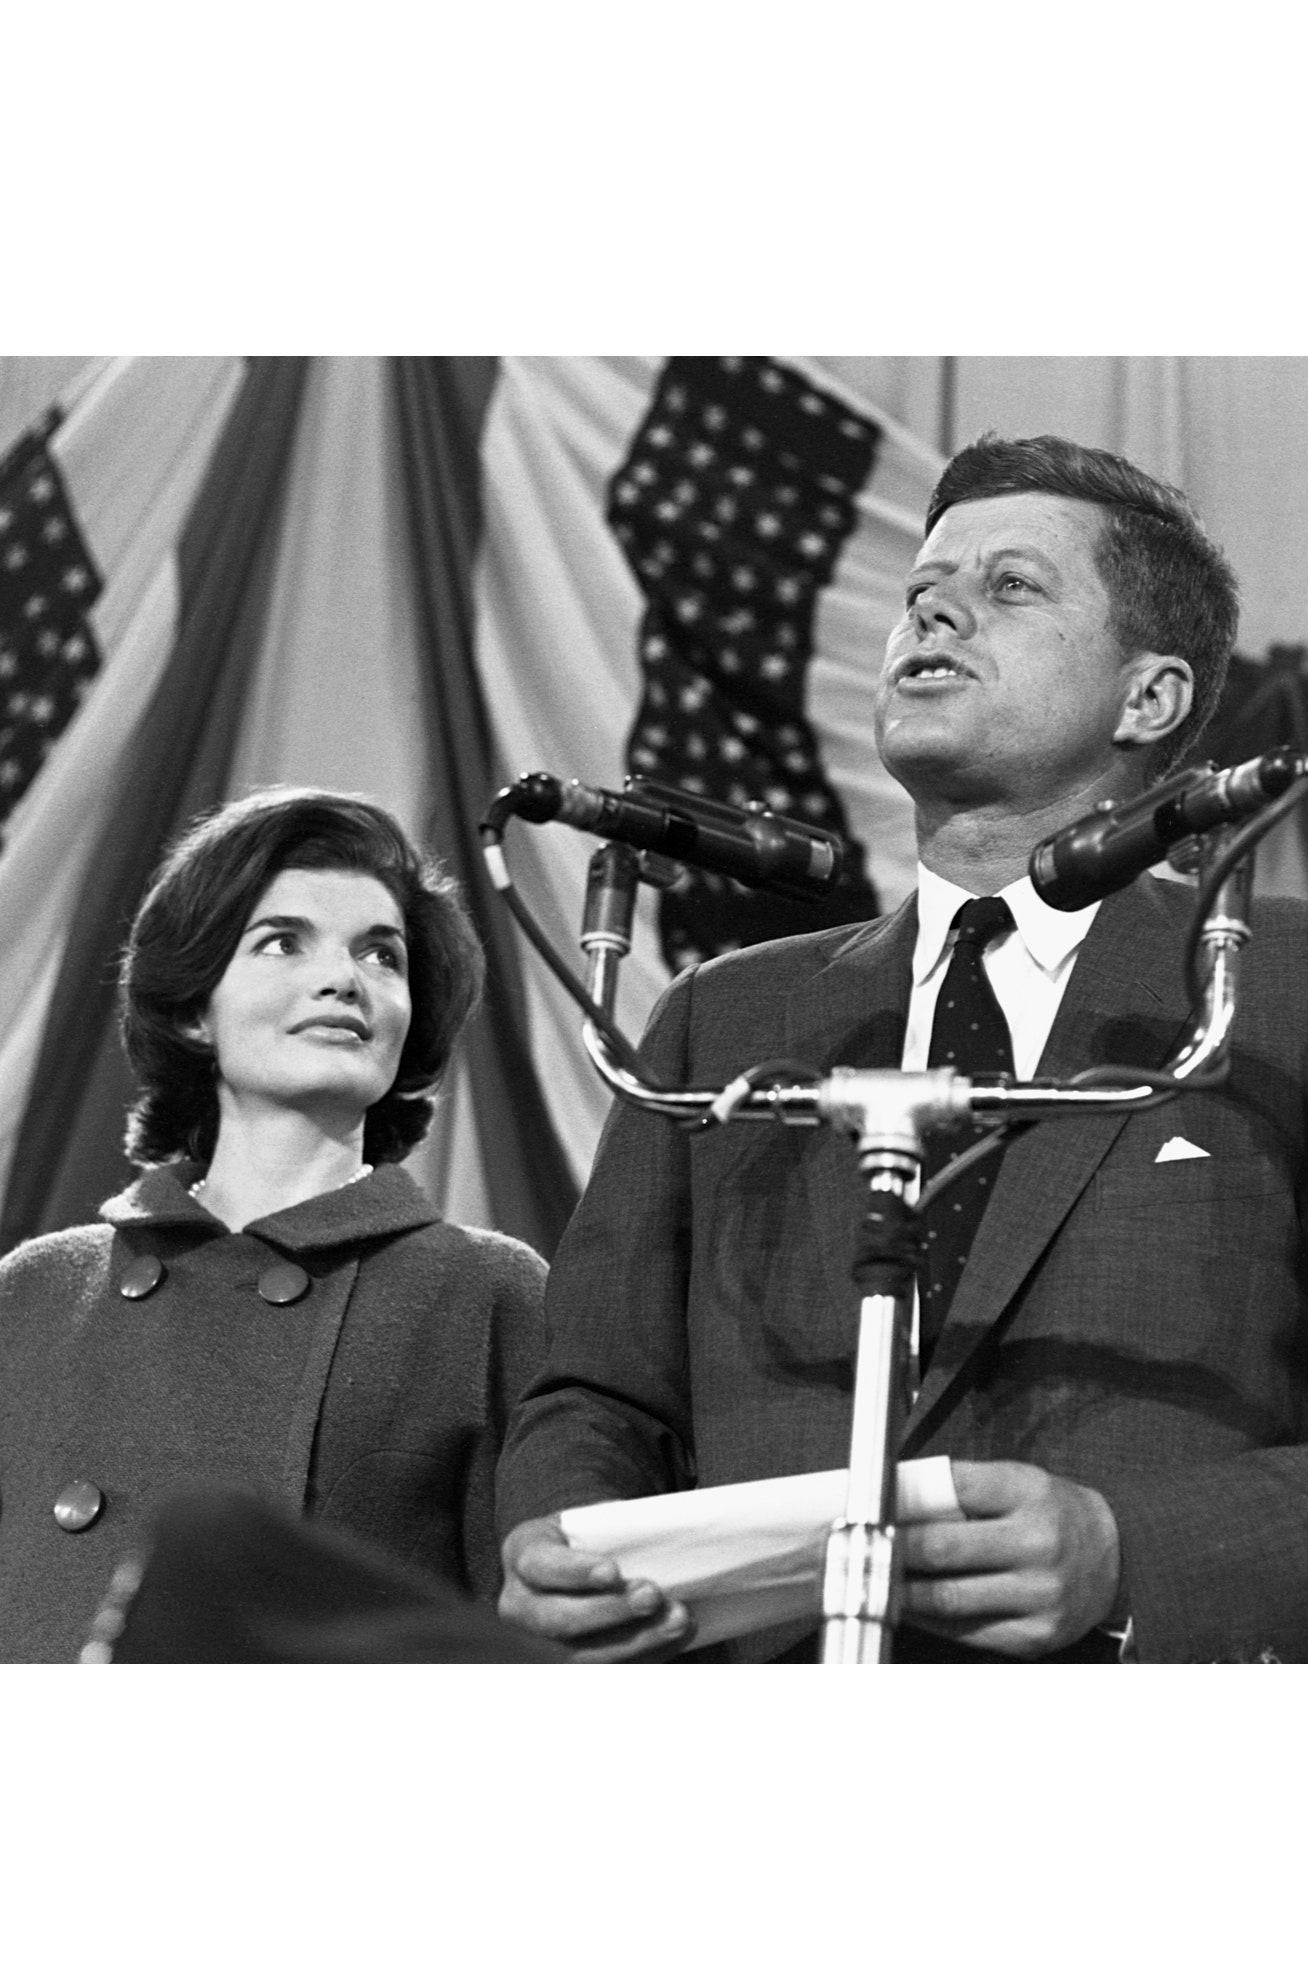 Jacqueline Kennedy watches as husband John F. Kennedy speaks into several microphones in front of a back drop of flags....